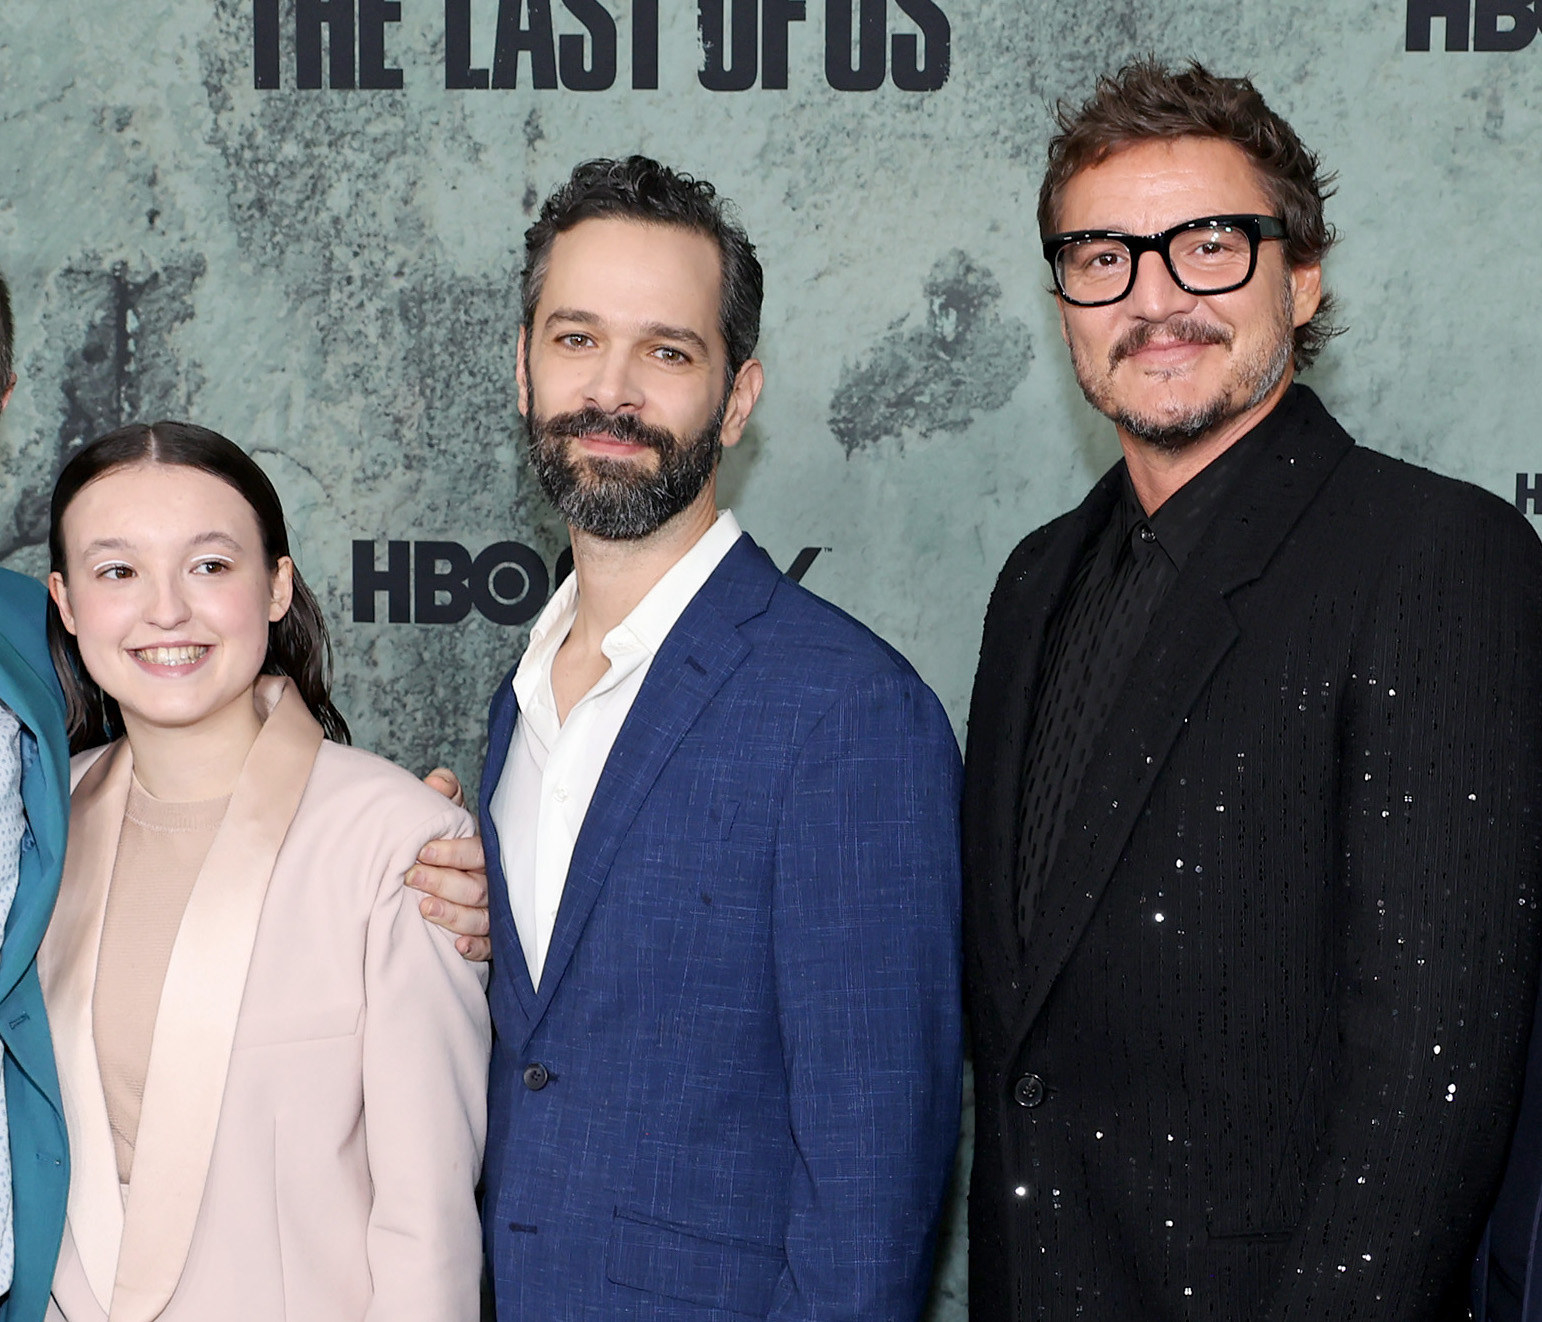 Everyone is hyped for HBO's The Last of Us TV show, but why?